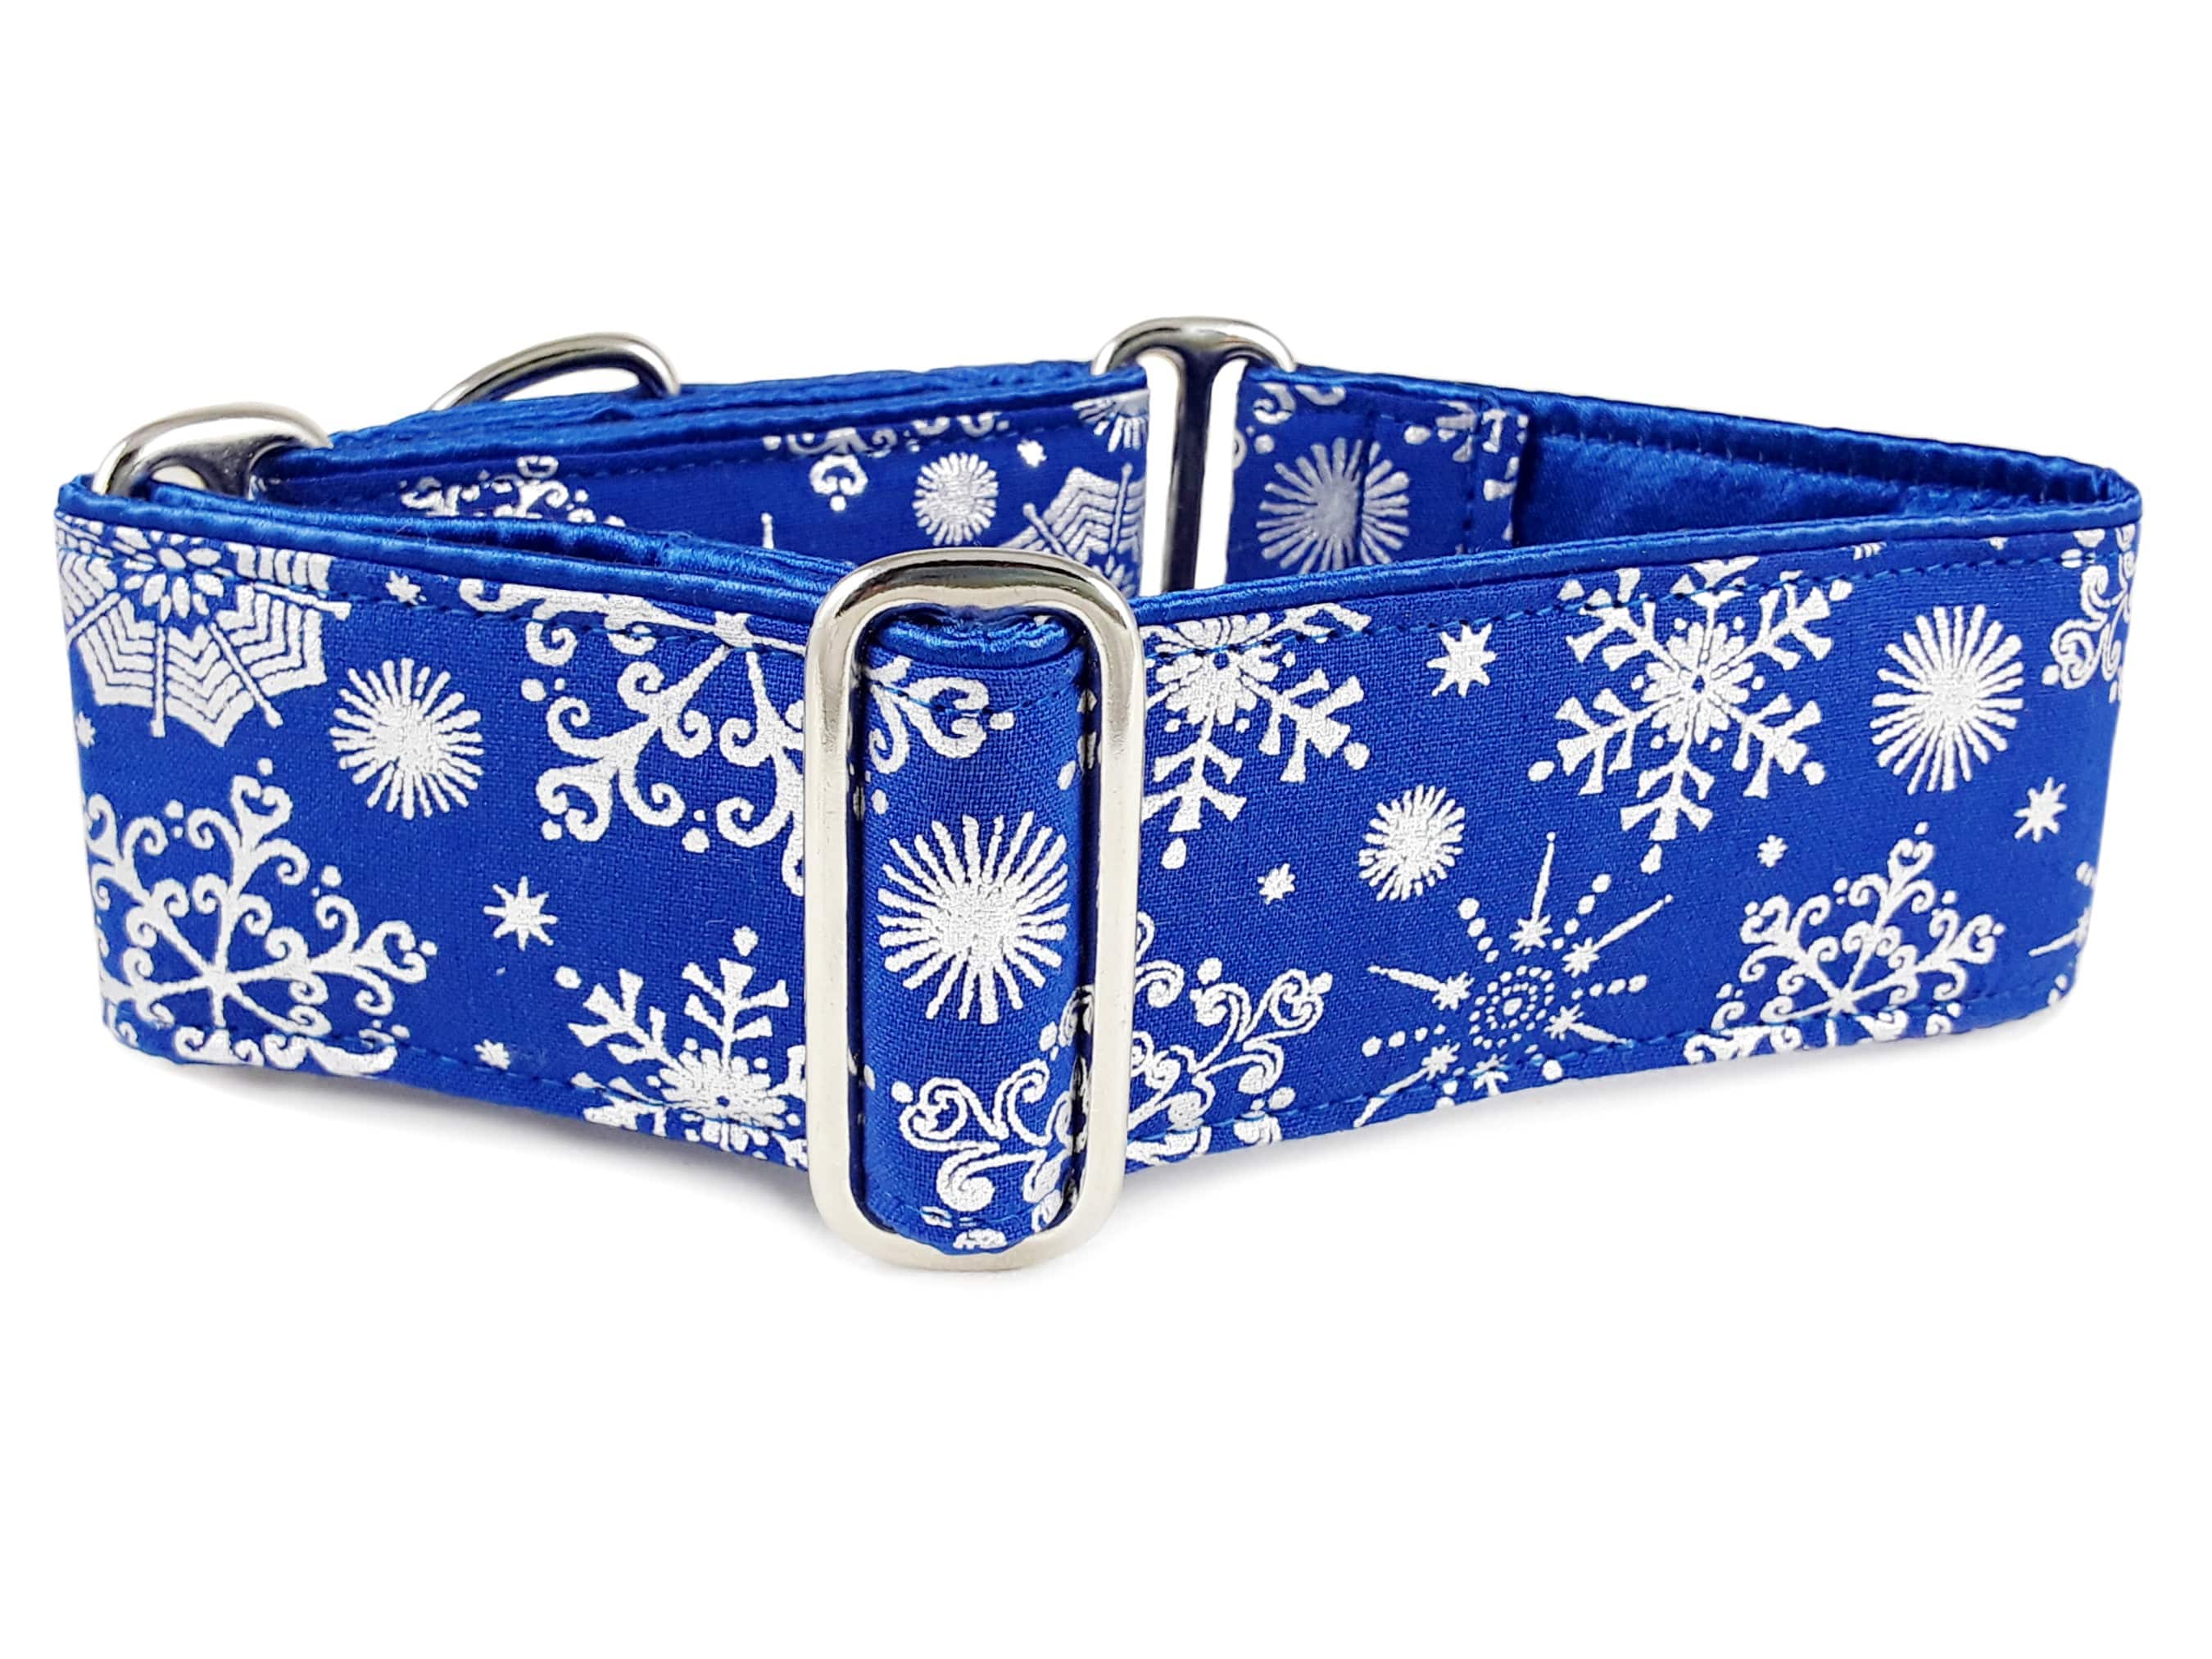 The Hound Haberdashery Collar Snowflakes in Blue - Martingale Dog Collar or Buckle Dog Collar - 1.5" & 2" Widths